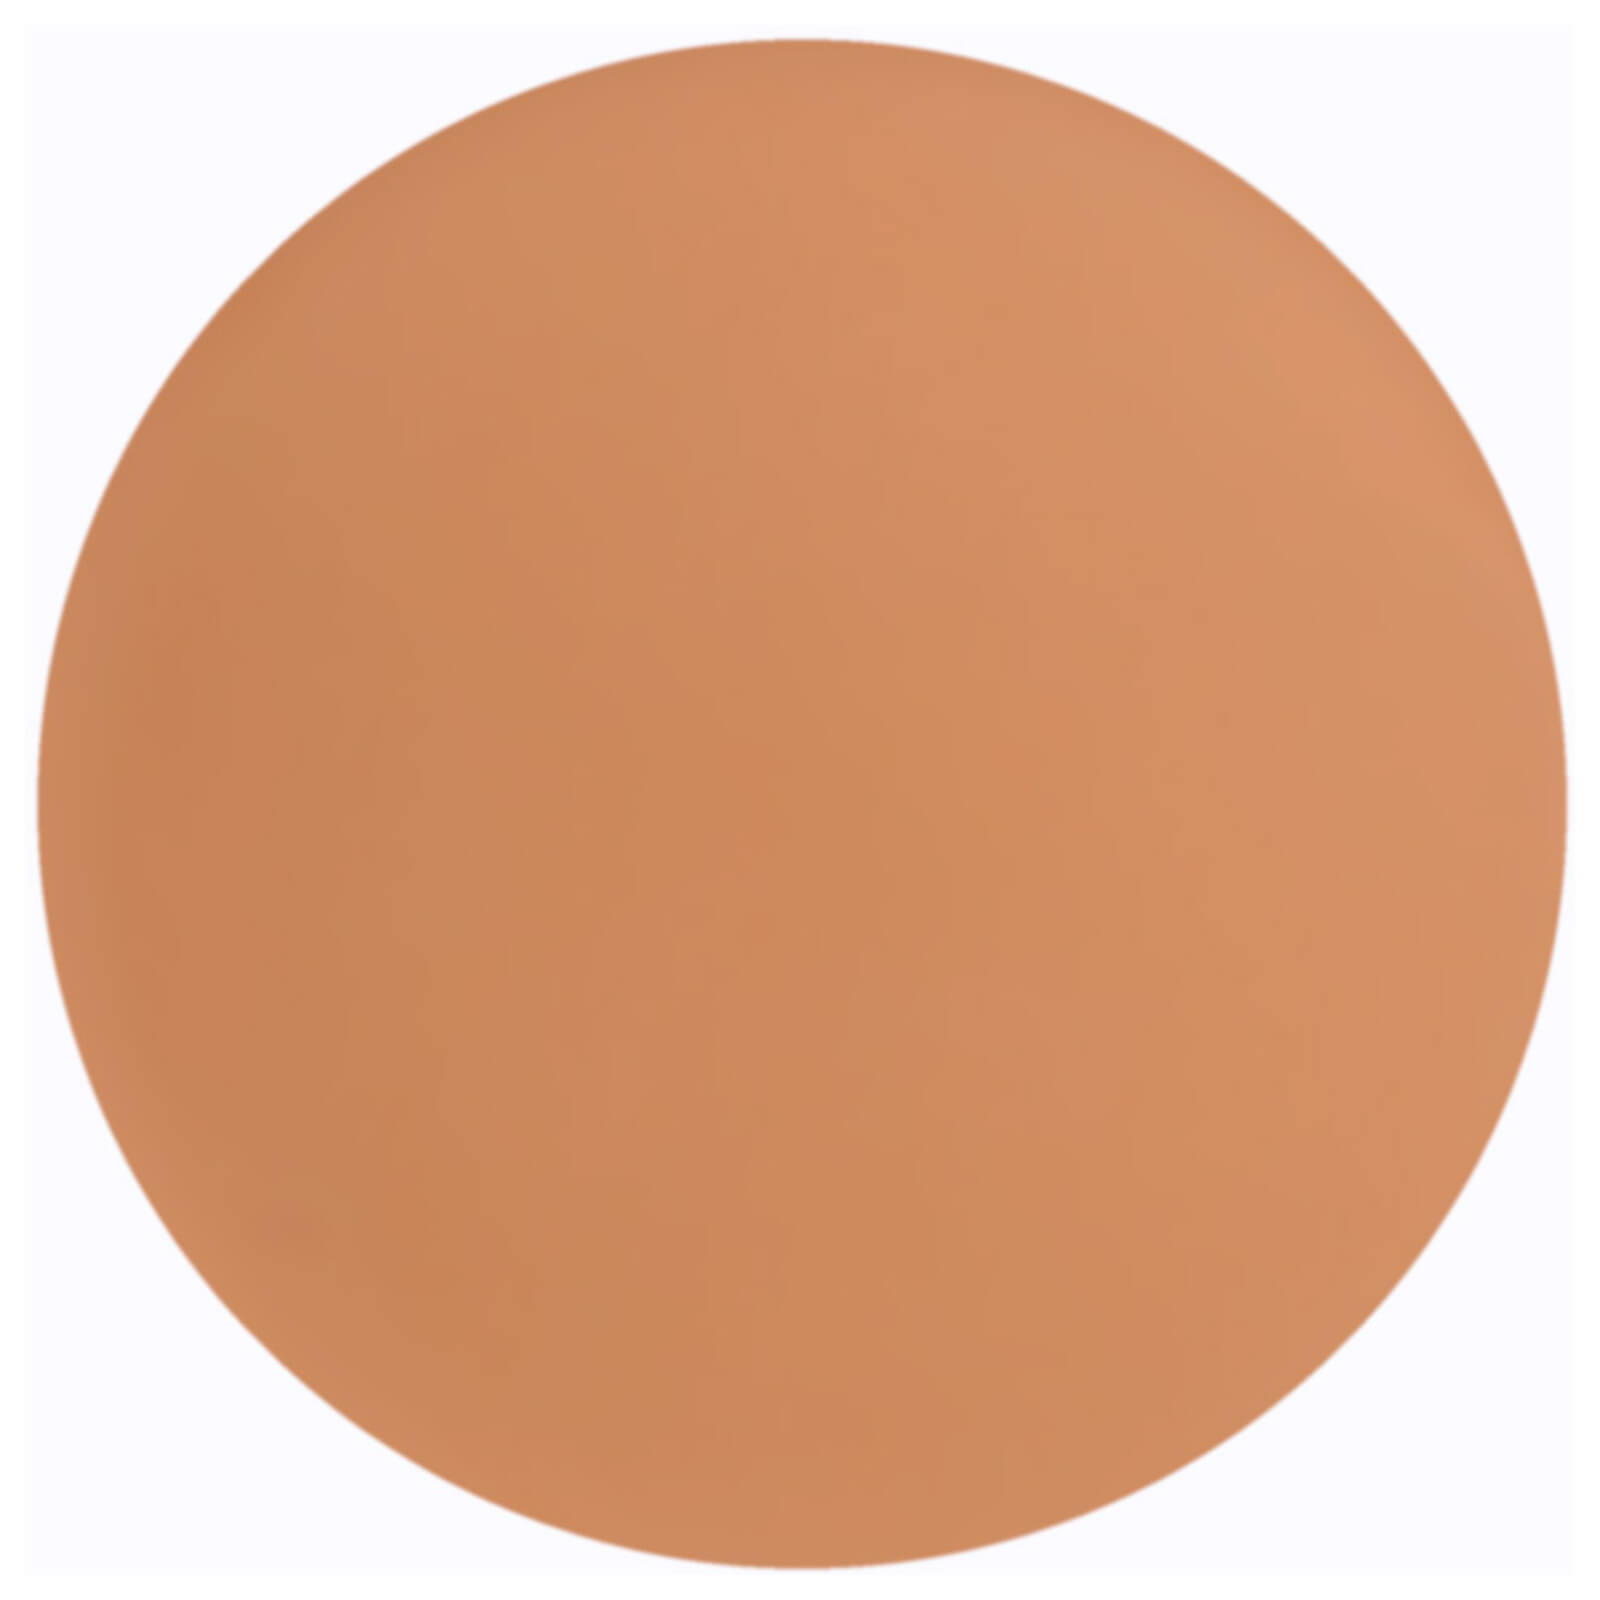 Youngblood Mineral Radiance Creme Powder Foundation Refill 7g (Various Shades) - Rose Beige